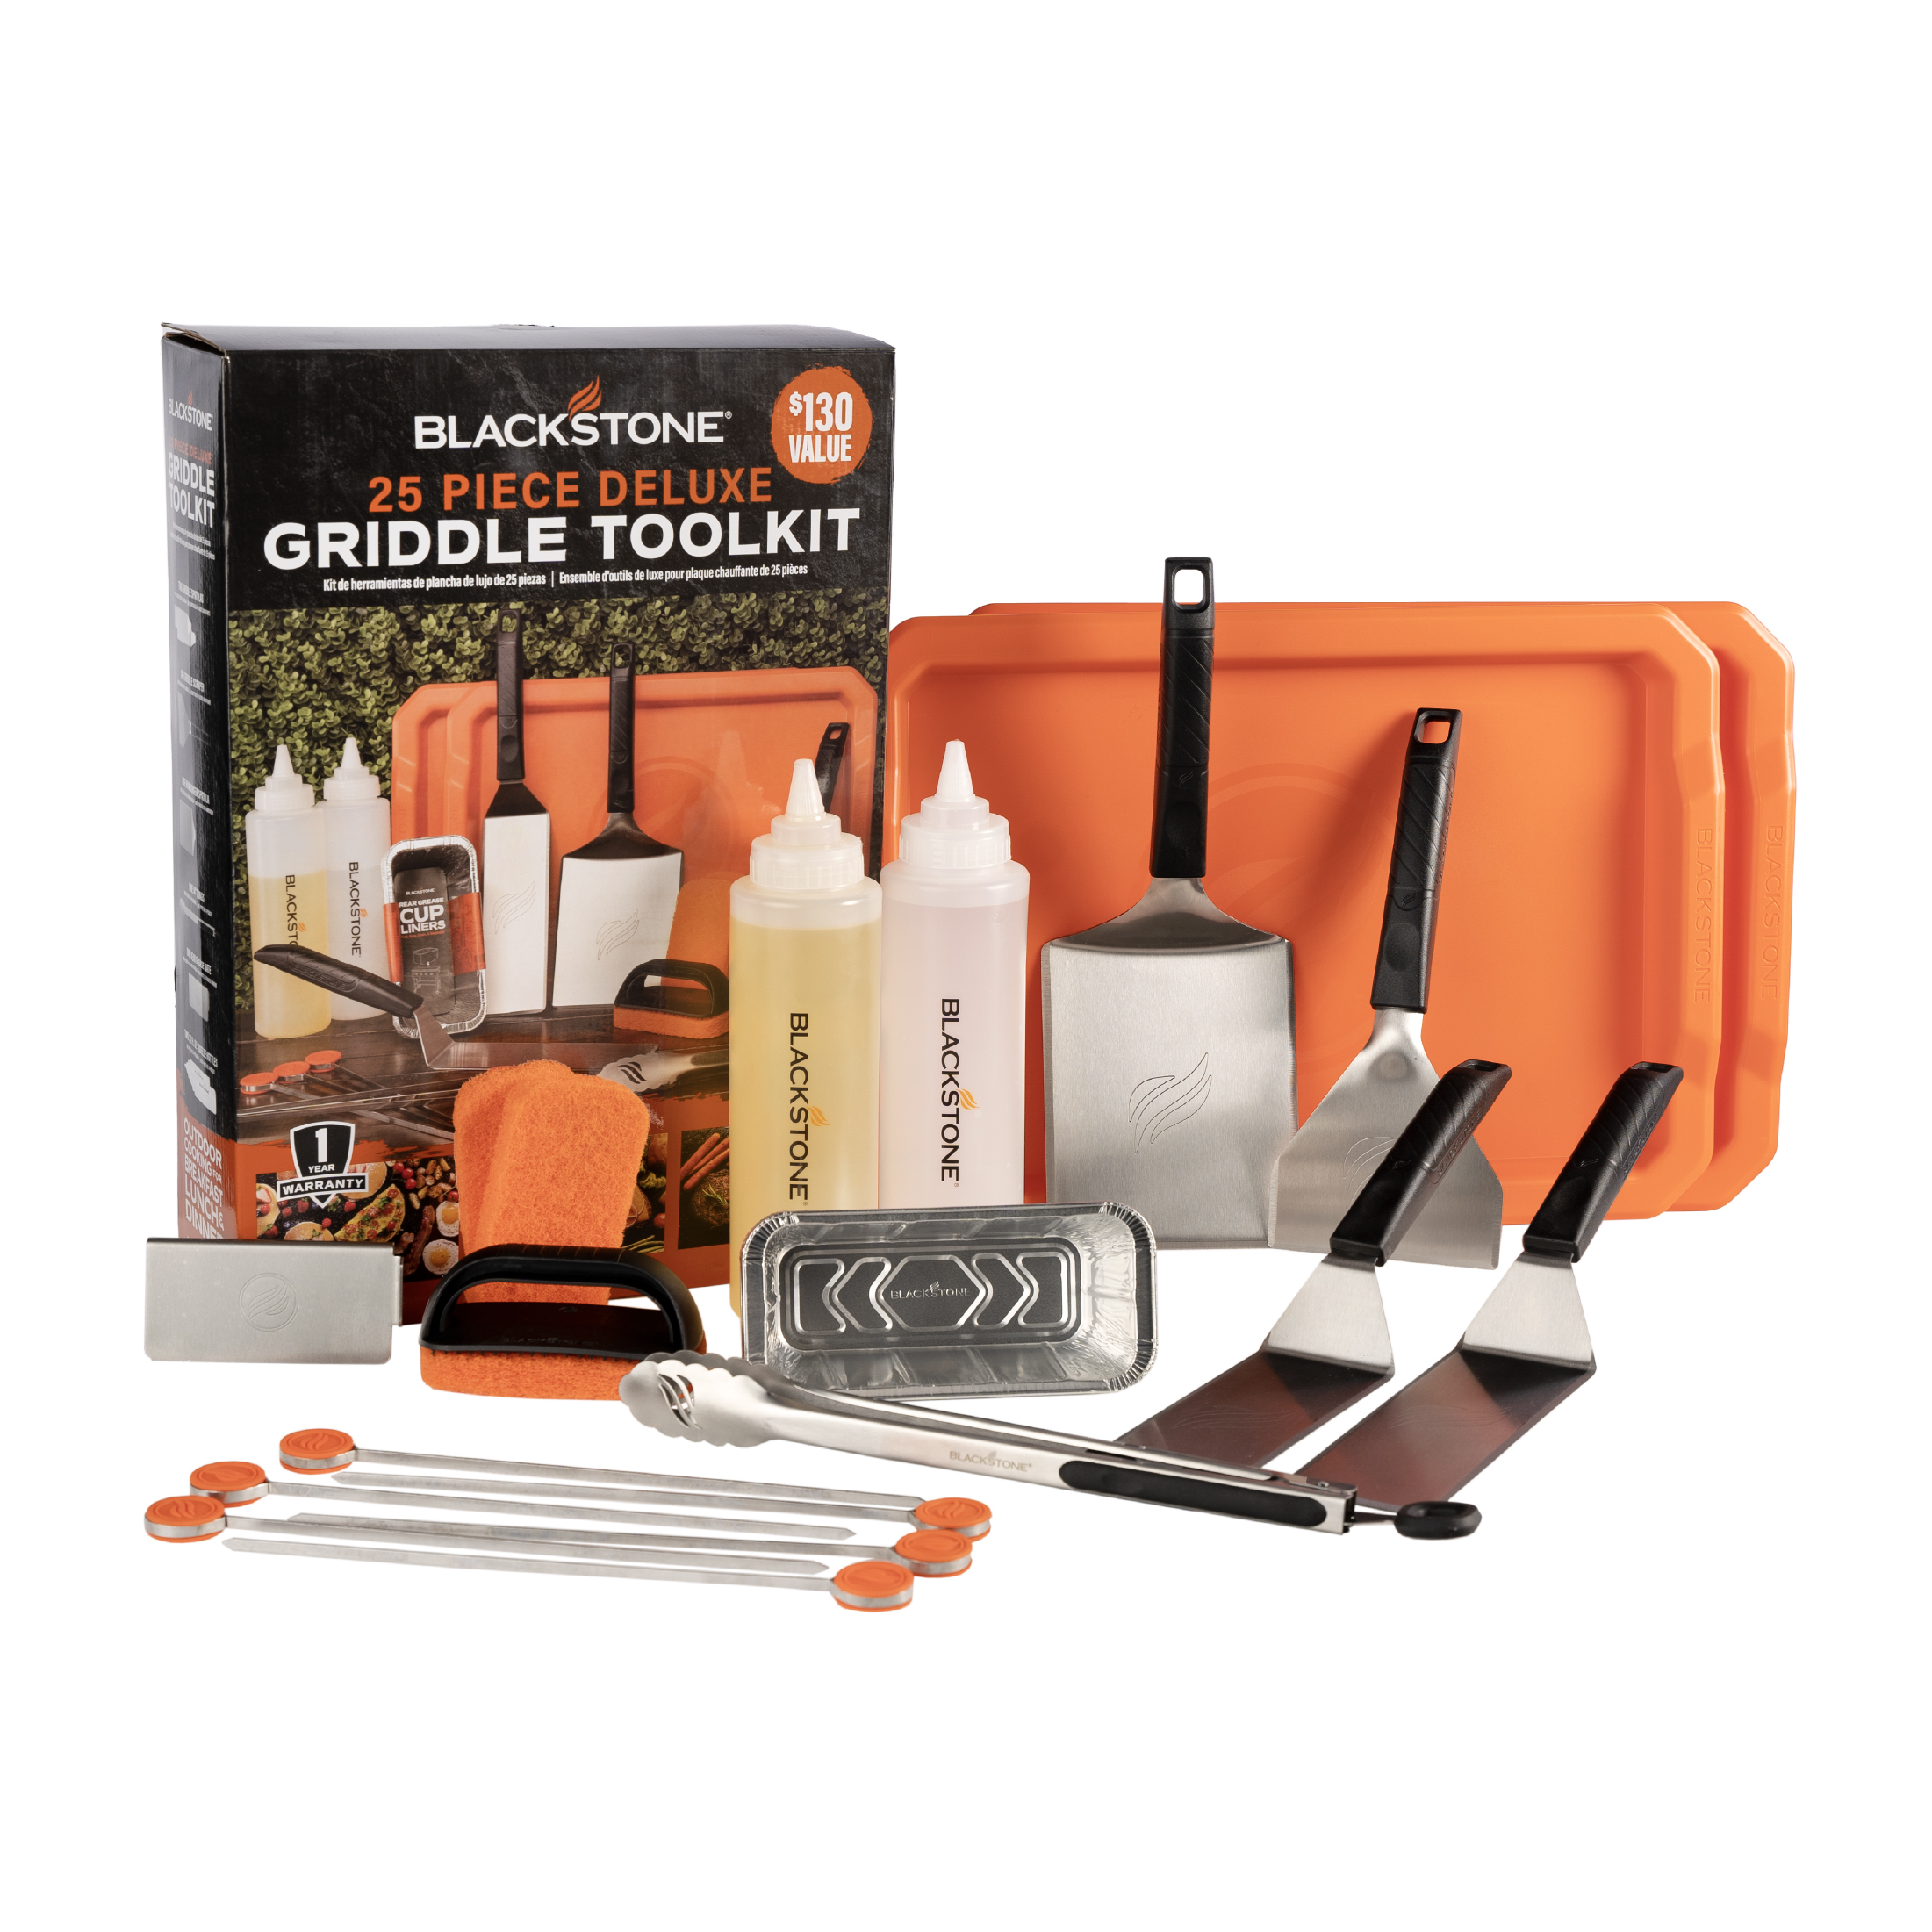 Blackstone 25 Piece Griddle Tool Kit Gift Set for Outdoor Cooking - image 1 of 13